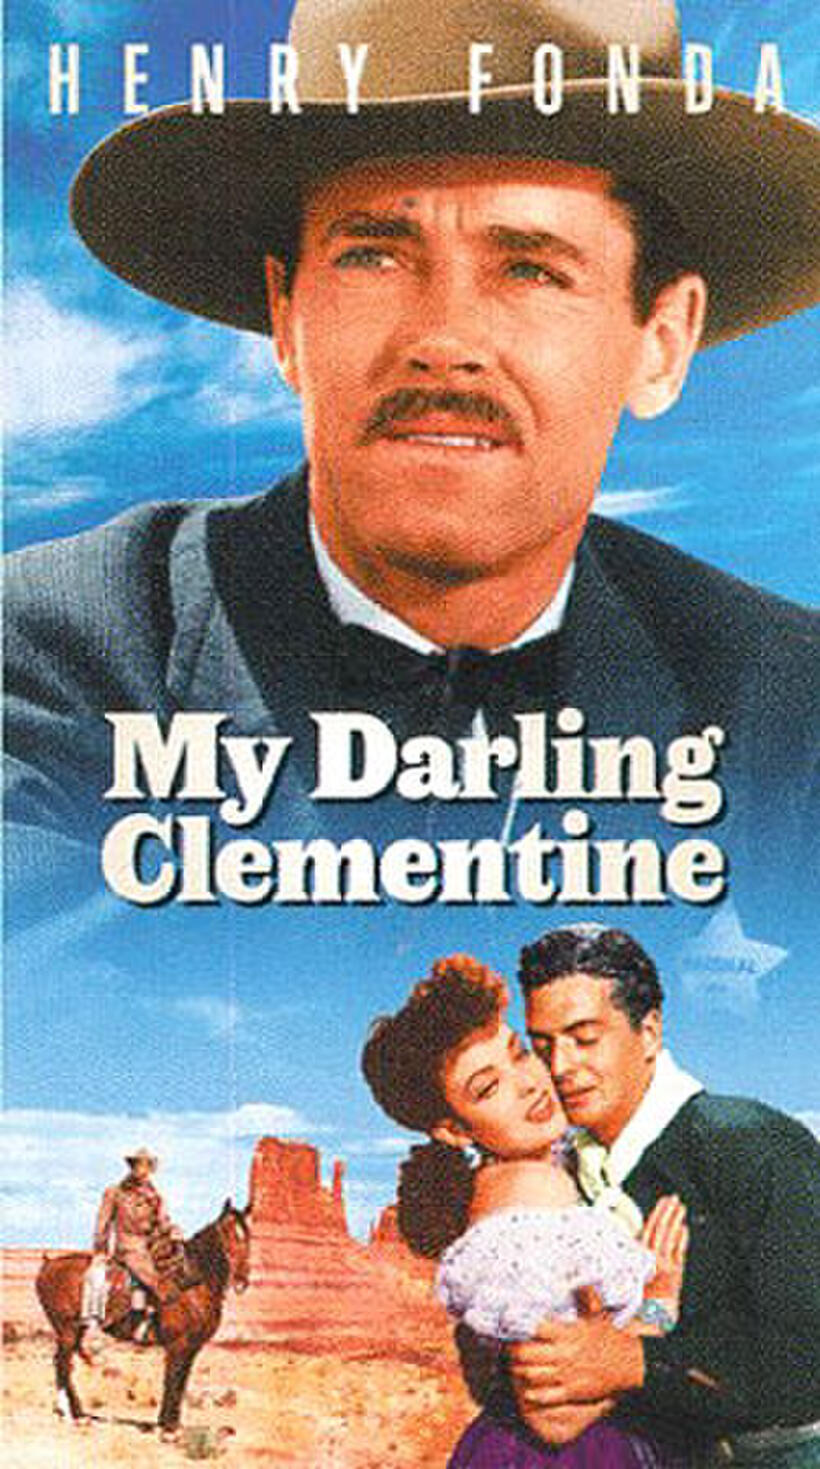 Poster art for "My Darling Clementine."